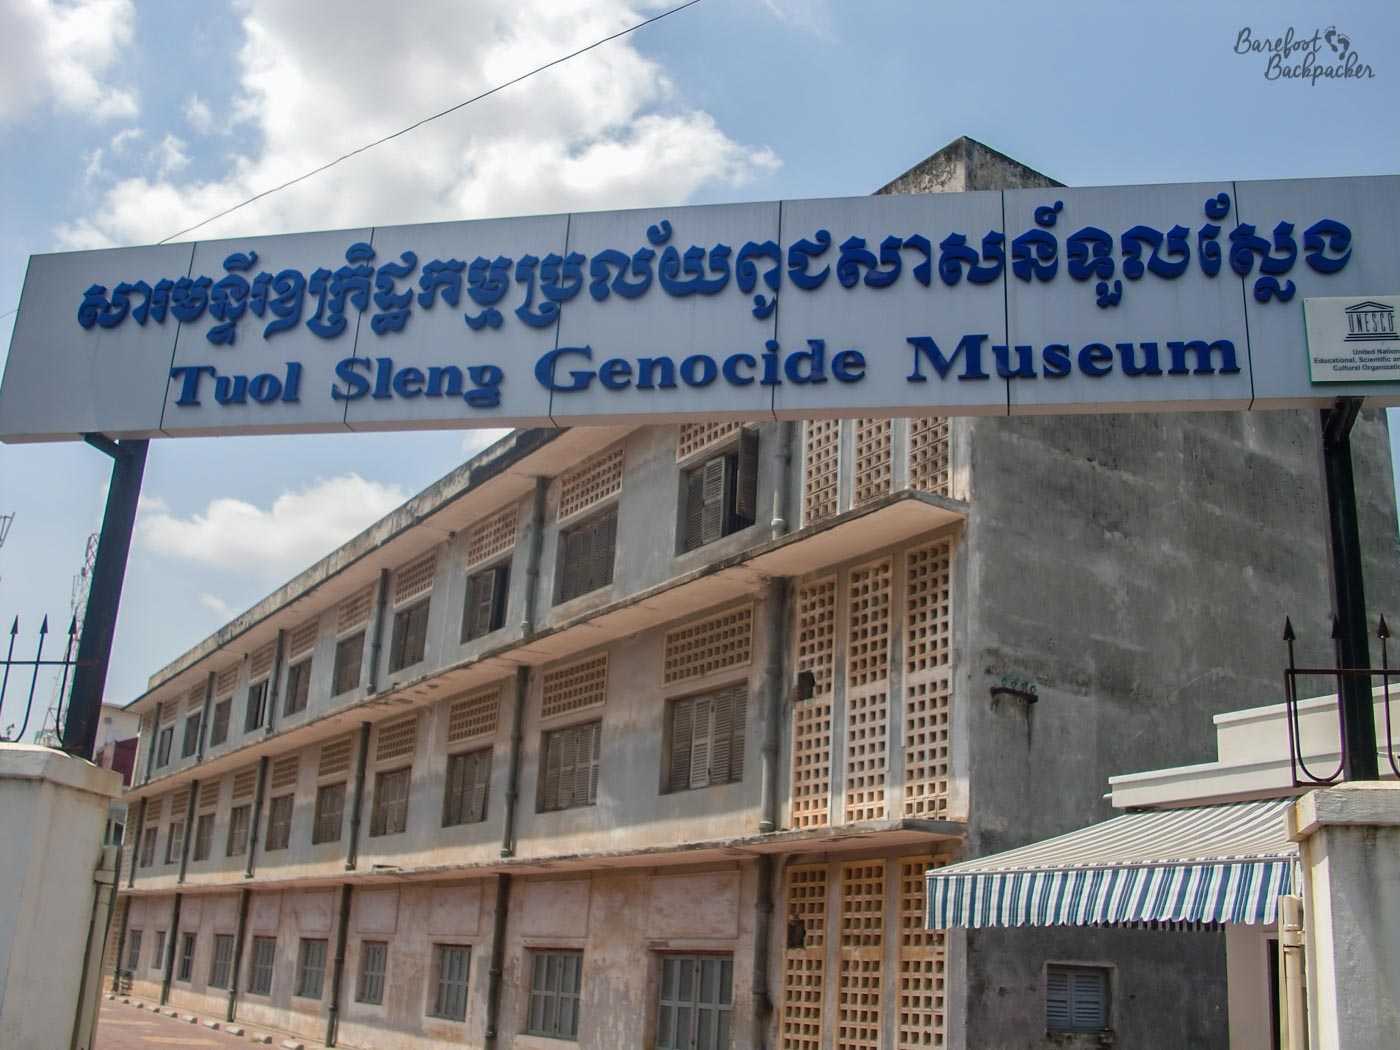 Signpost for the Tuol Sleng Genocide Museum. In the background is a concrete block of a three-storey building, with shuttered windows and ventilation bricks.